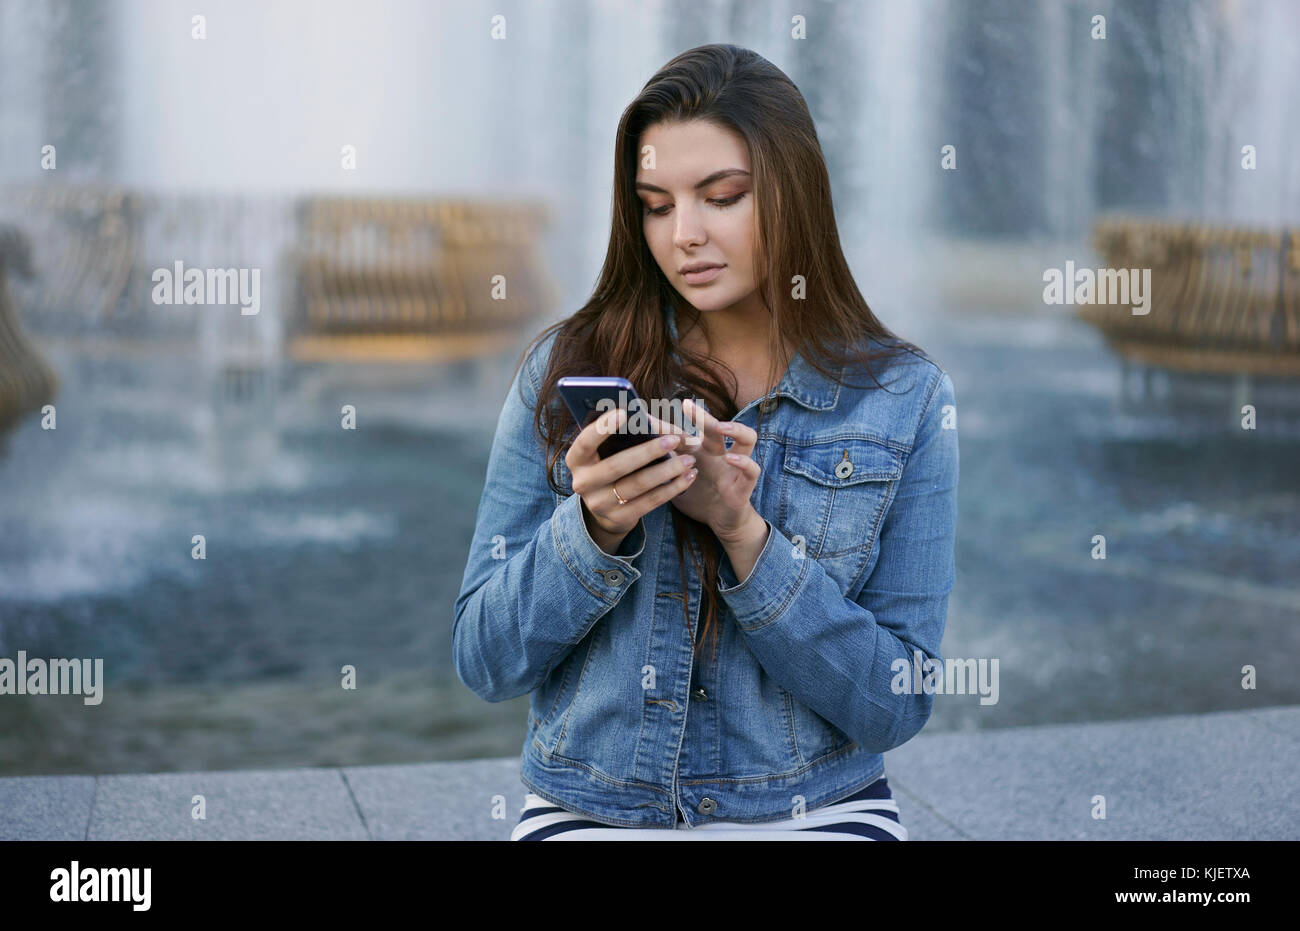 Caucasian woman texting on cell phone at fountain Stock Photo